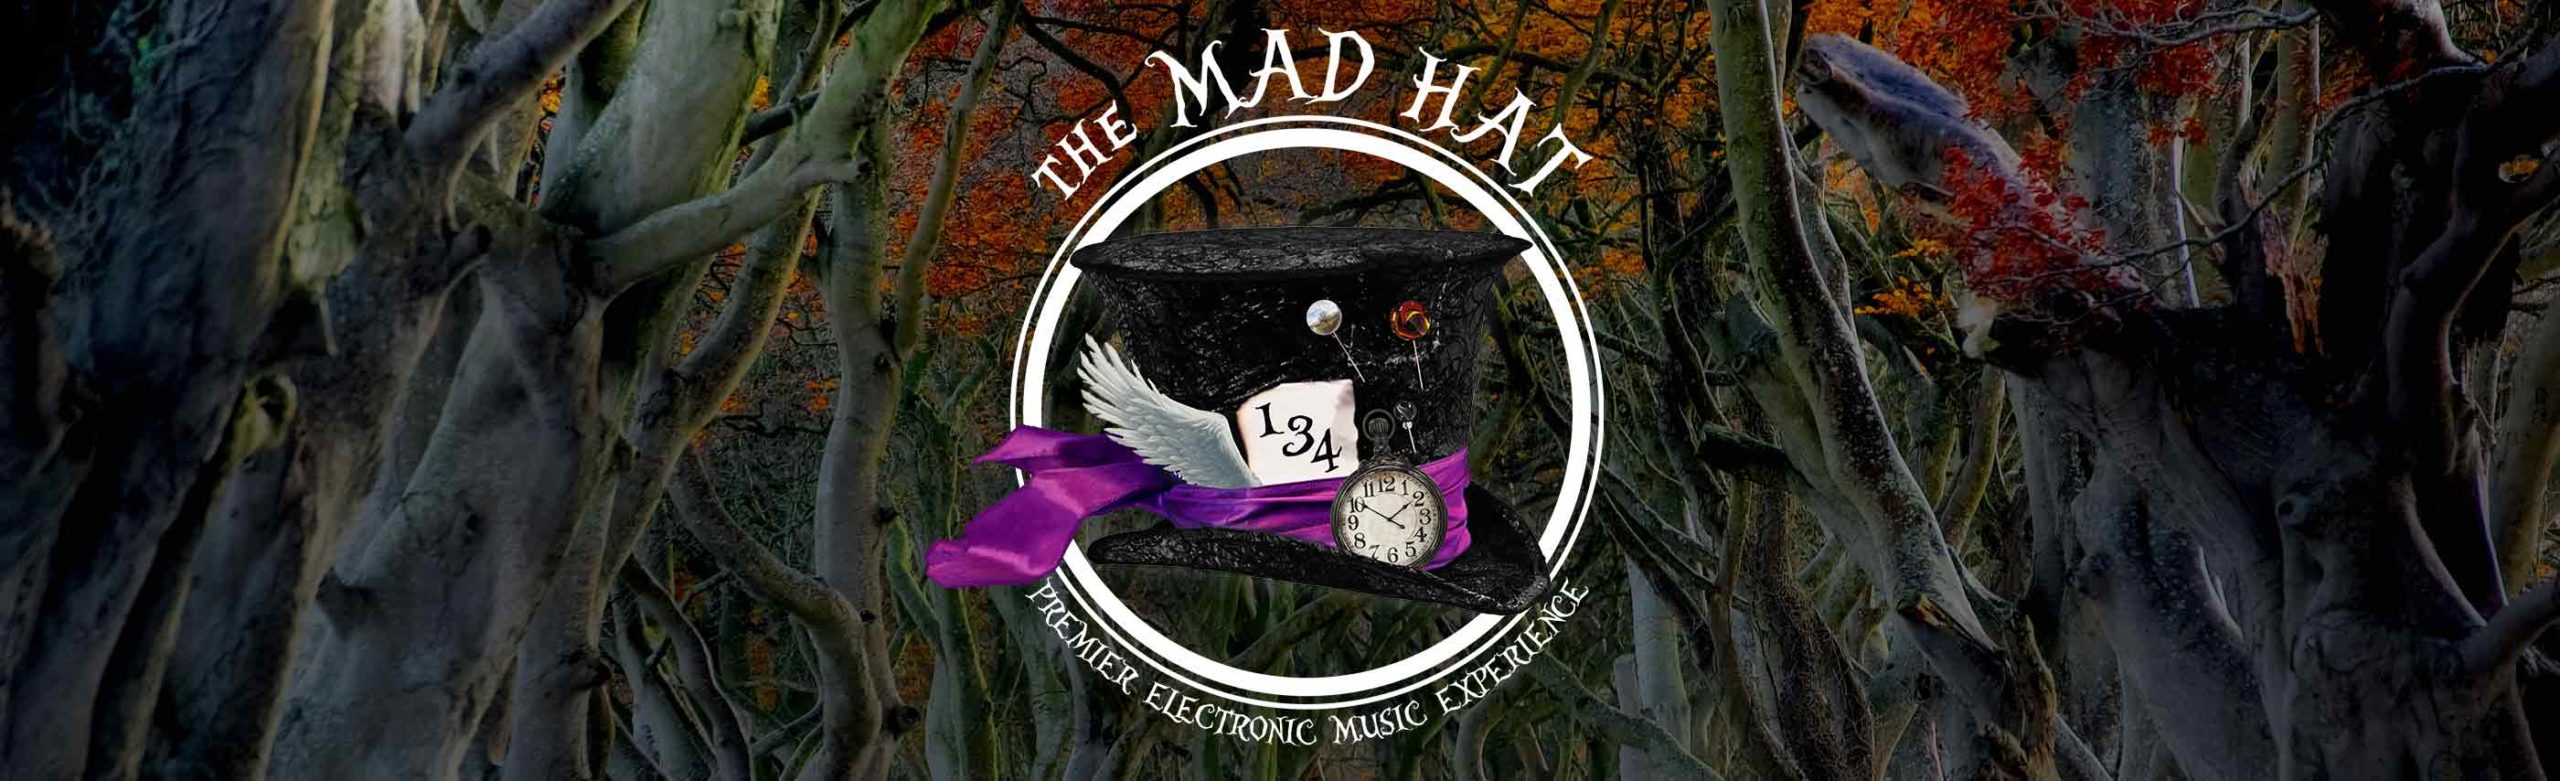 The Mad Hat Electronic Series Newsletter Image